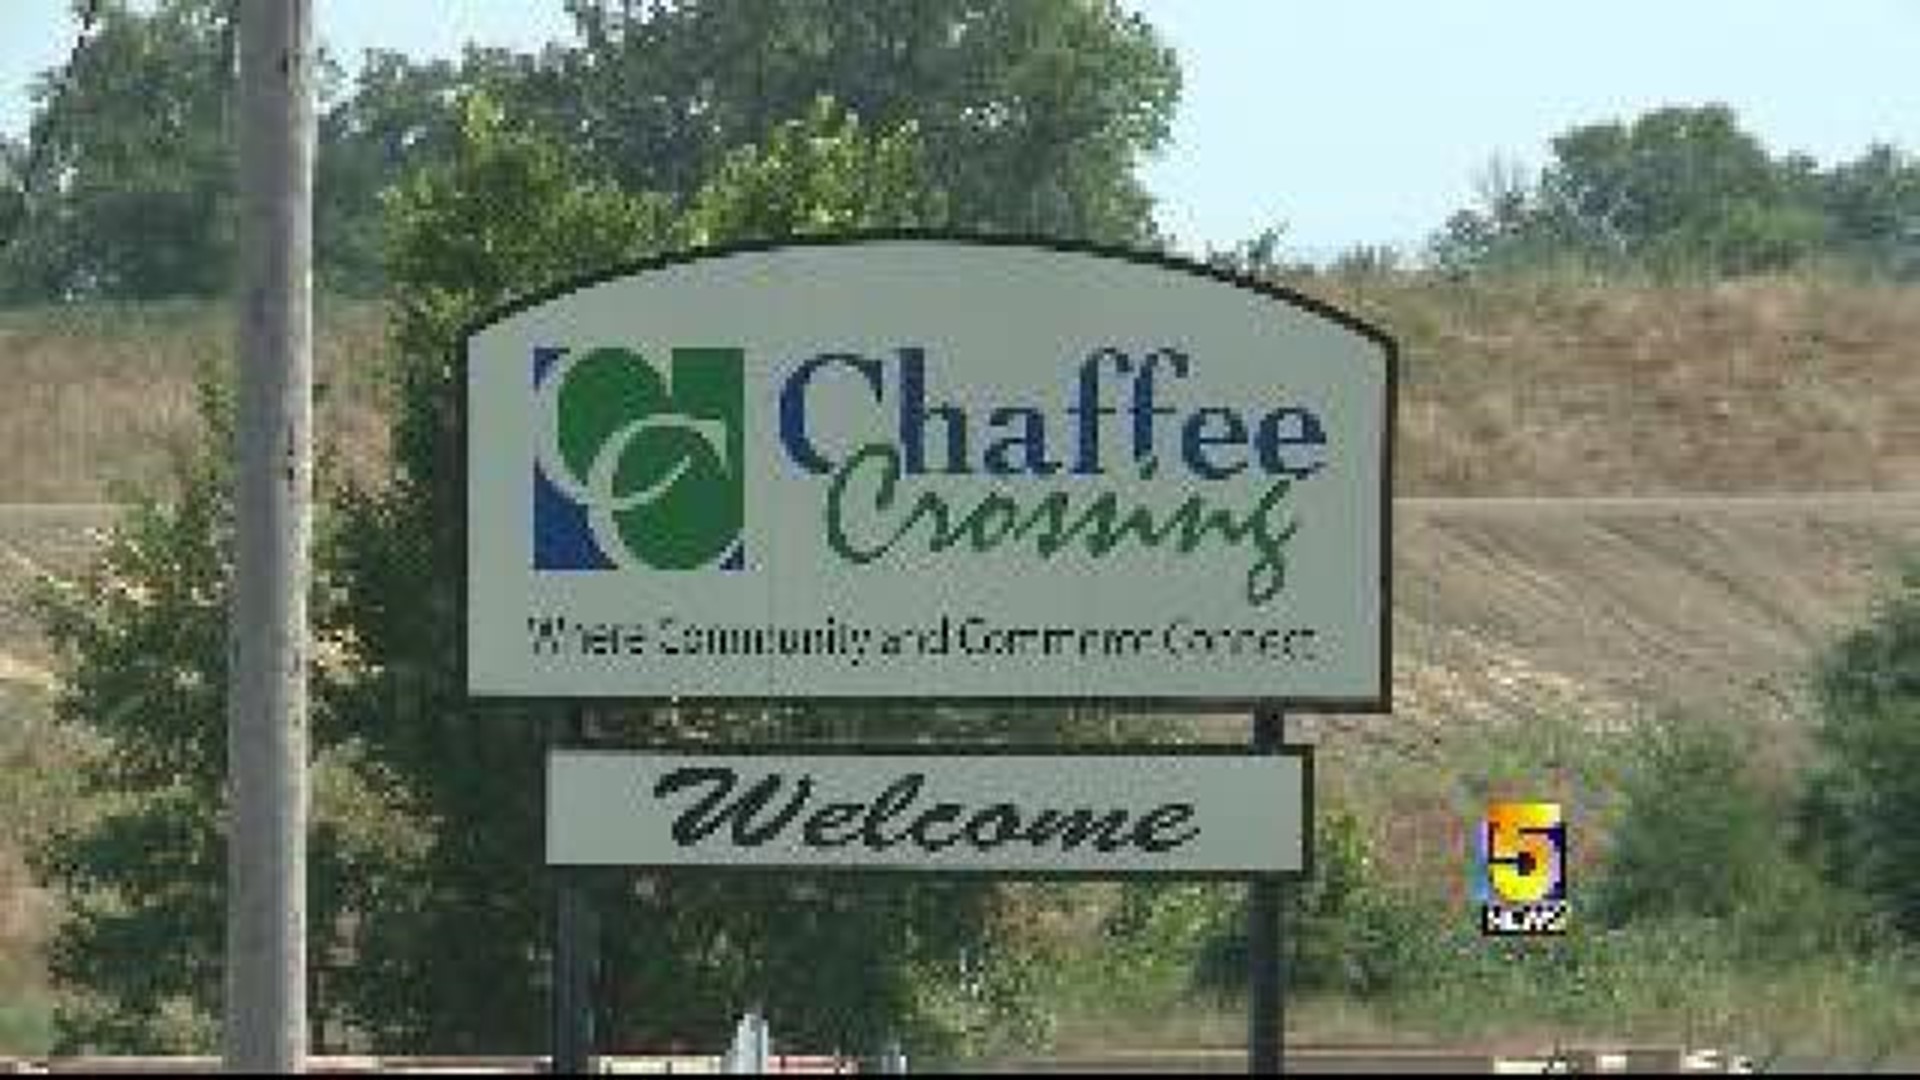 New Jobs Coming to Chaffee Crossing